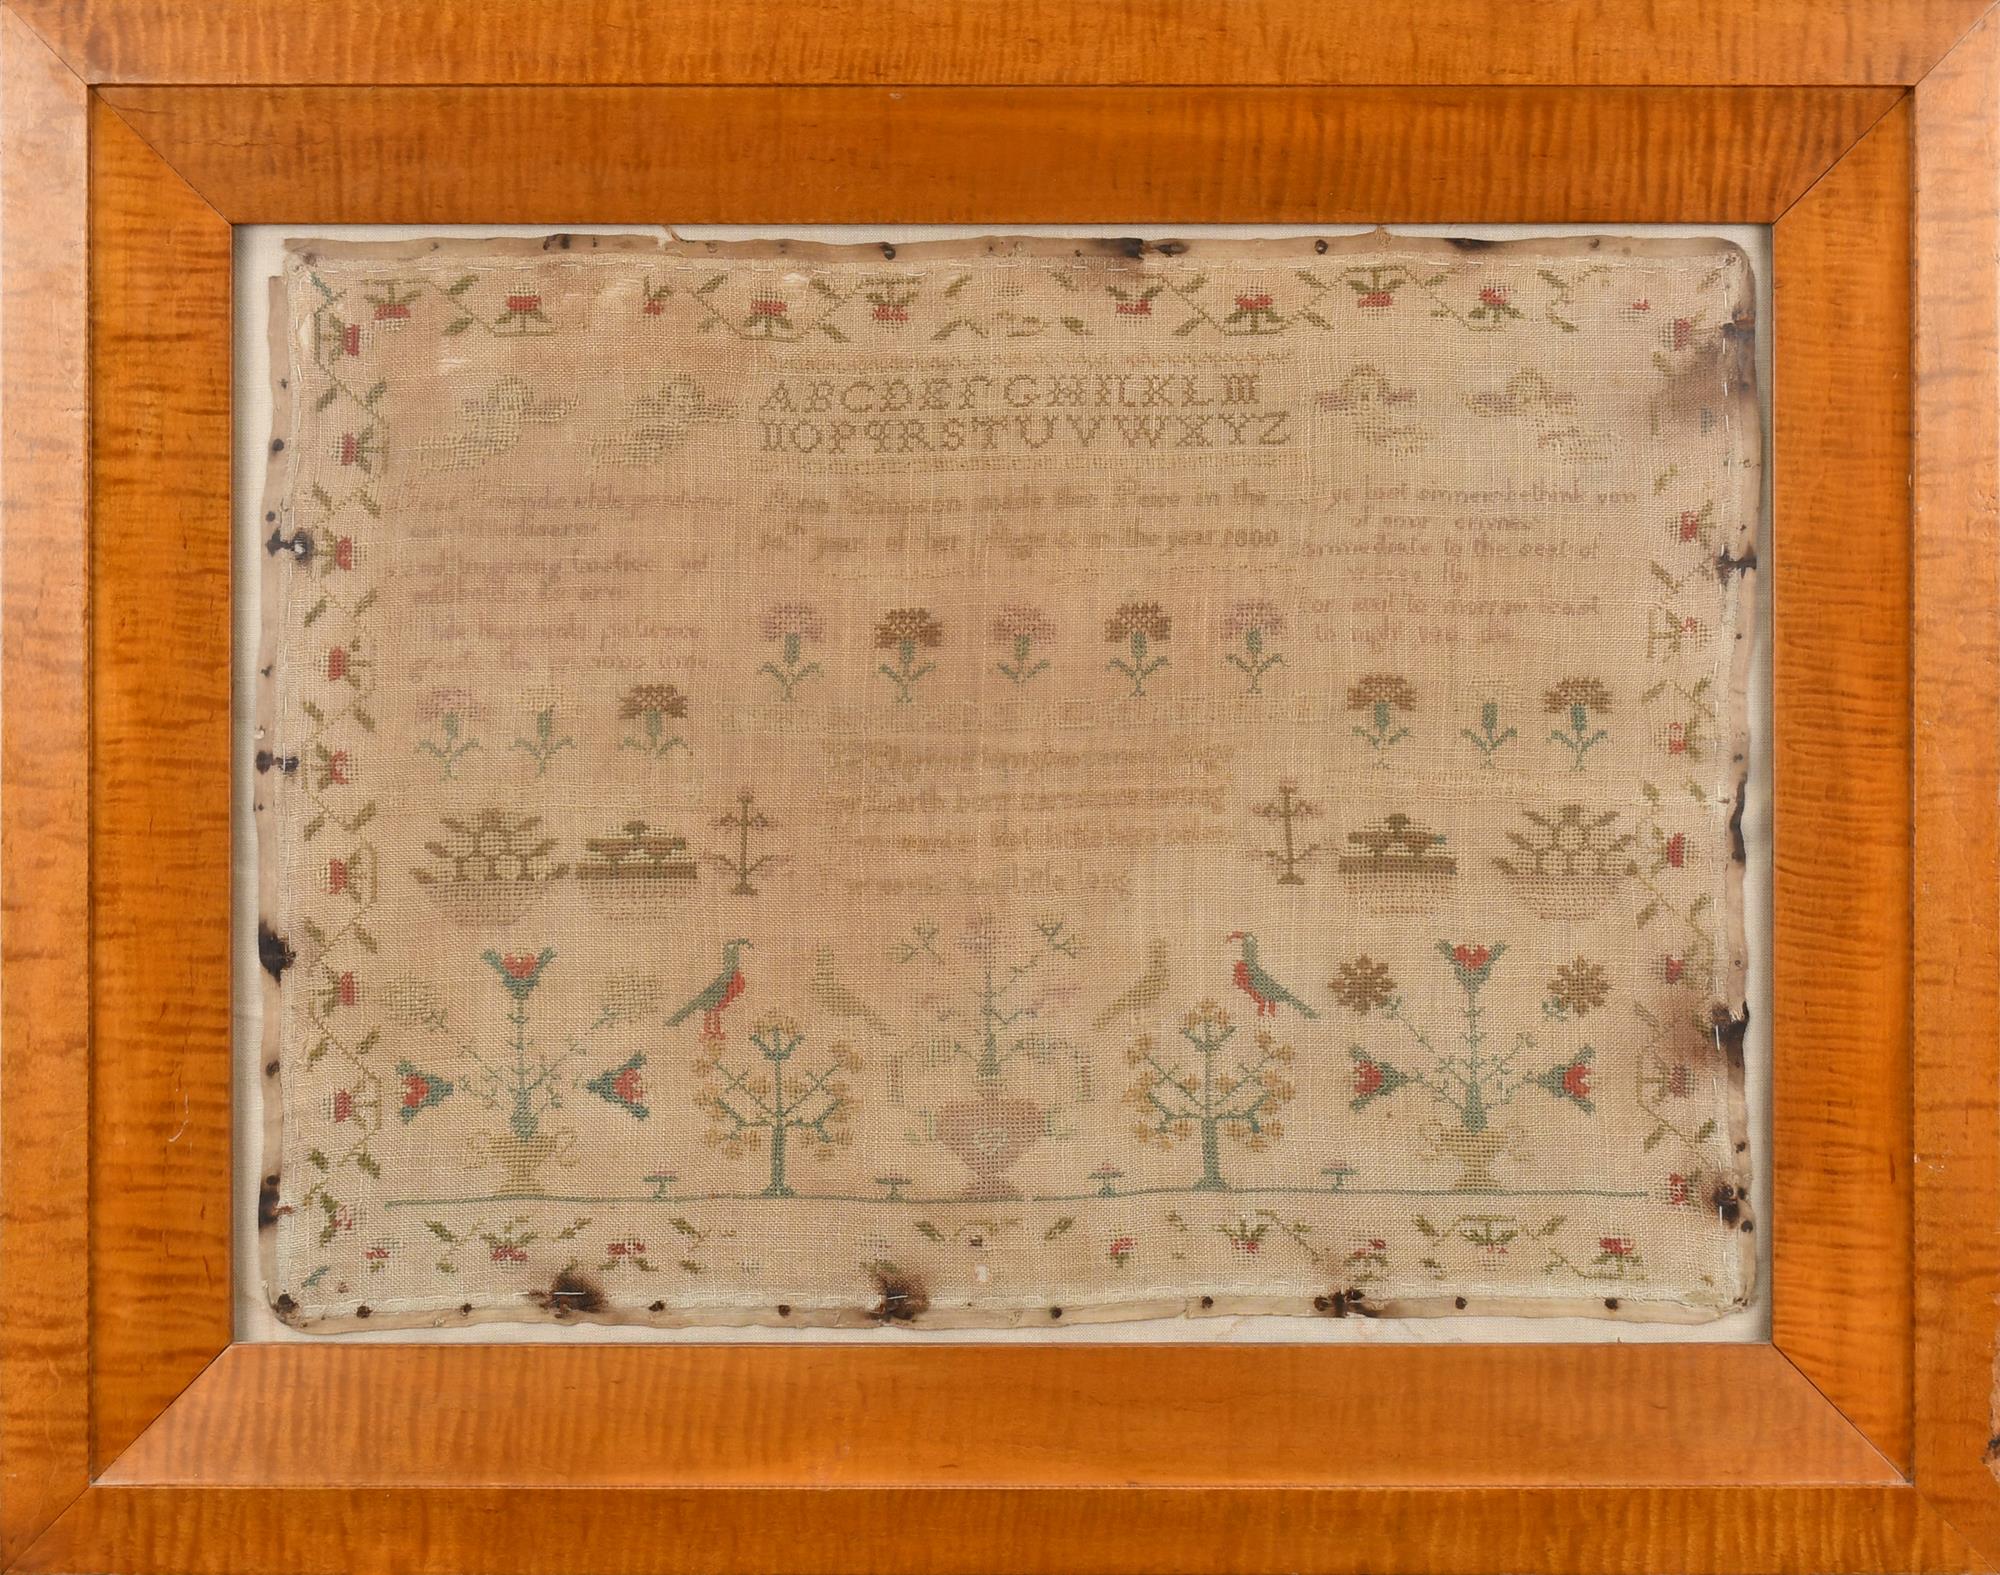 CA 1800 ANNE SIMPSON SAMPLER. With